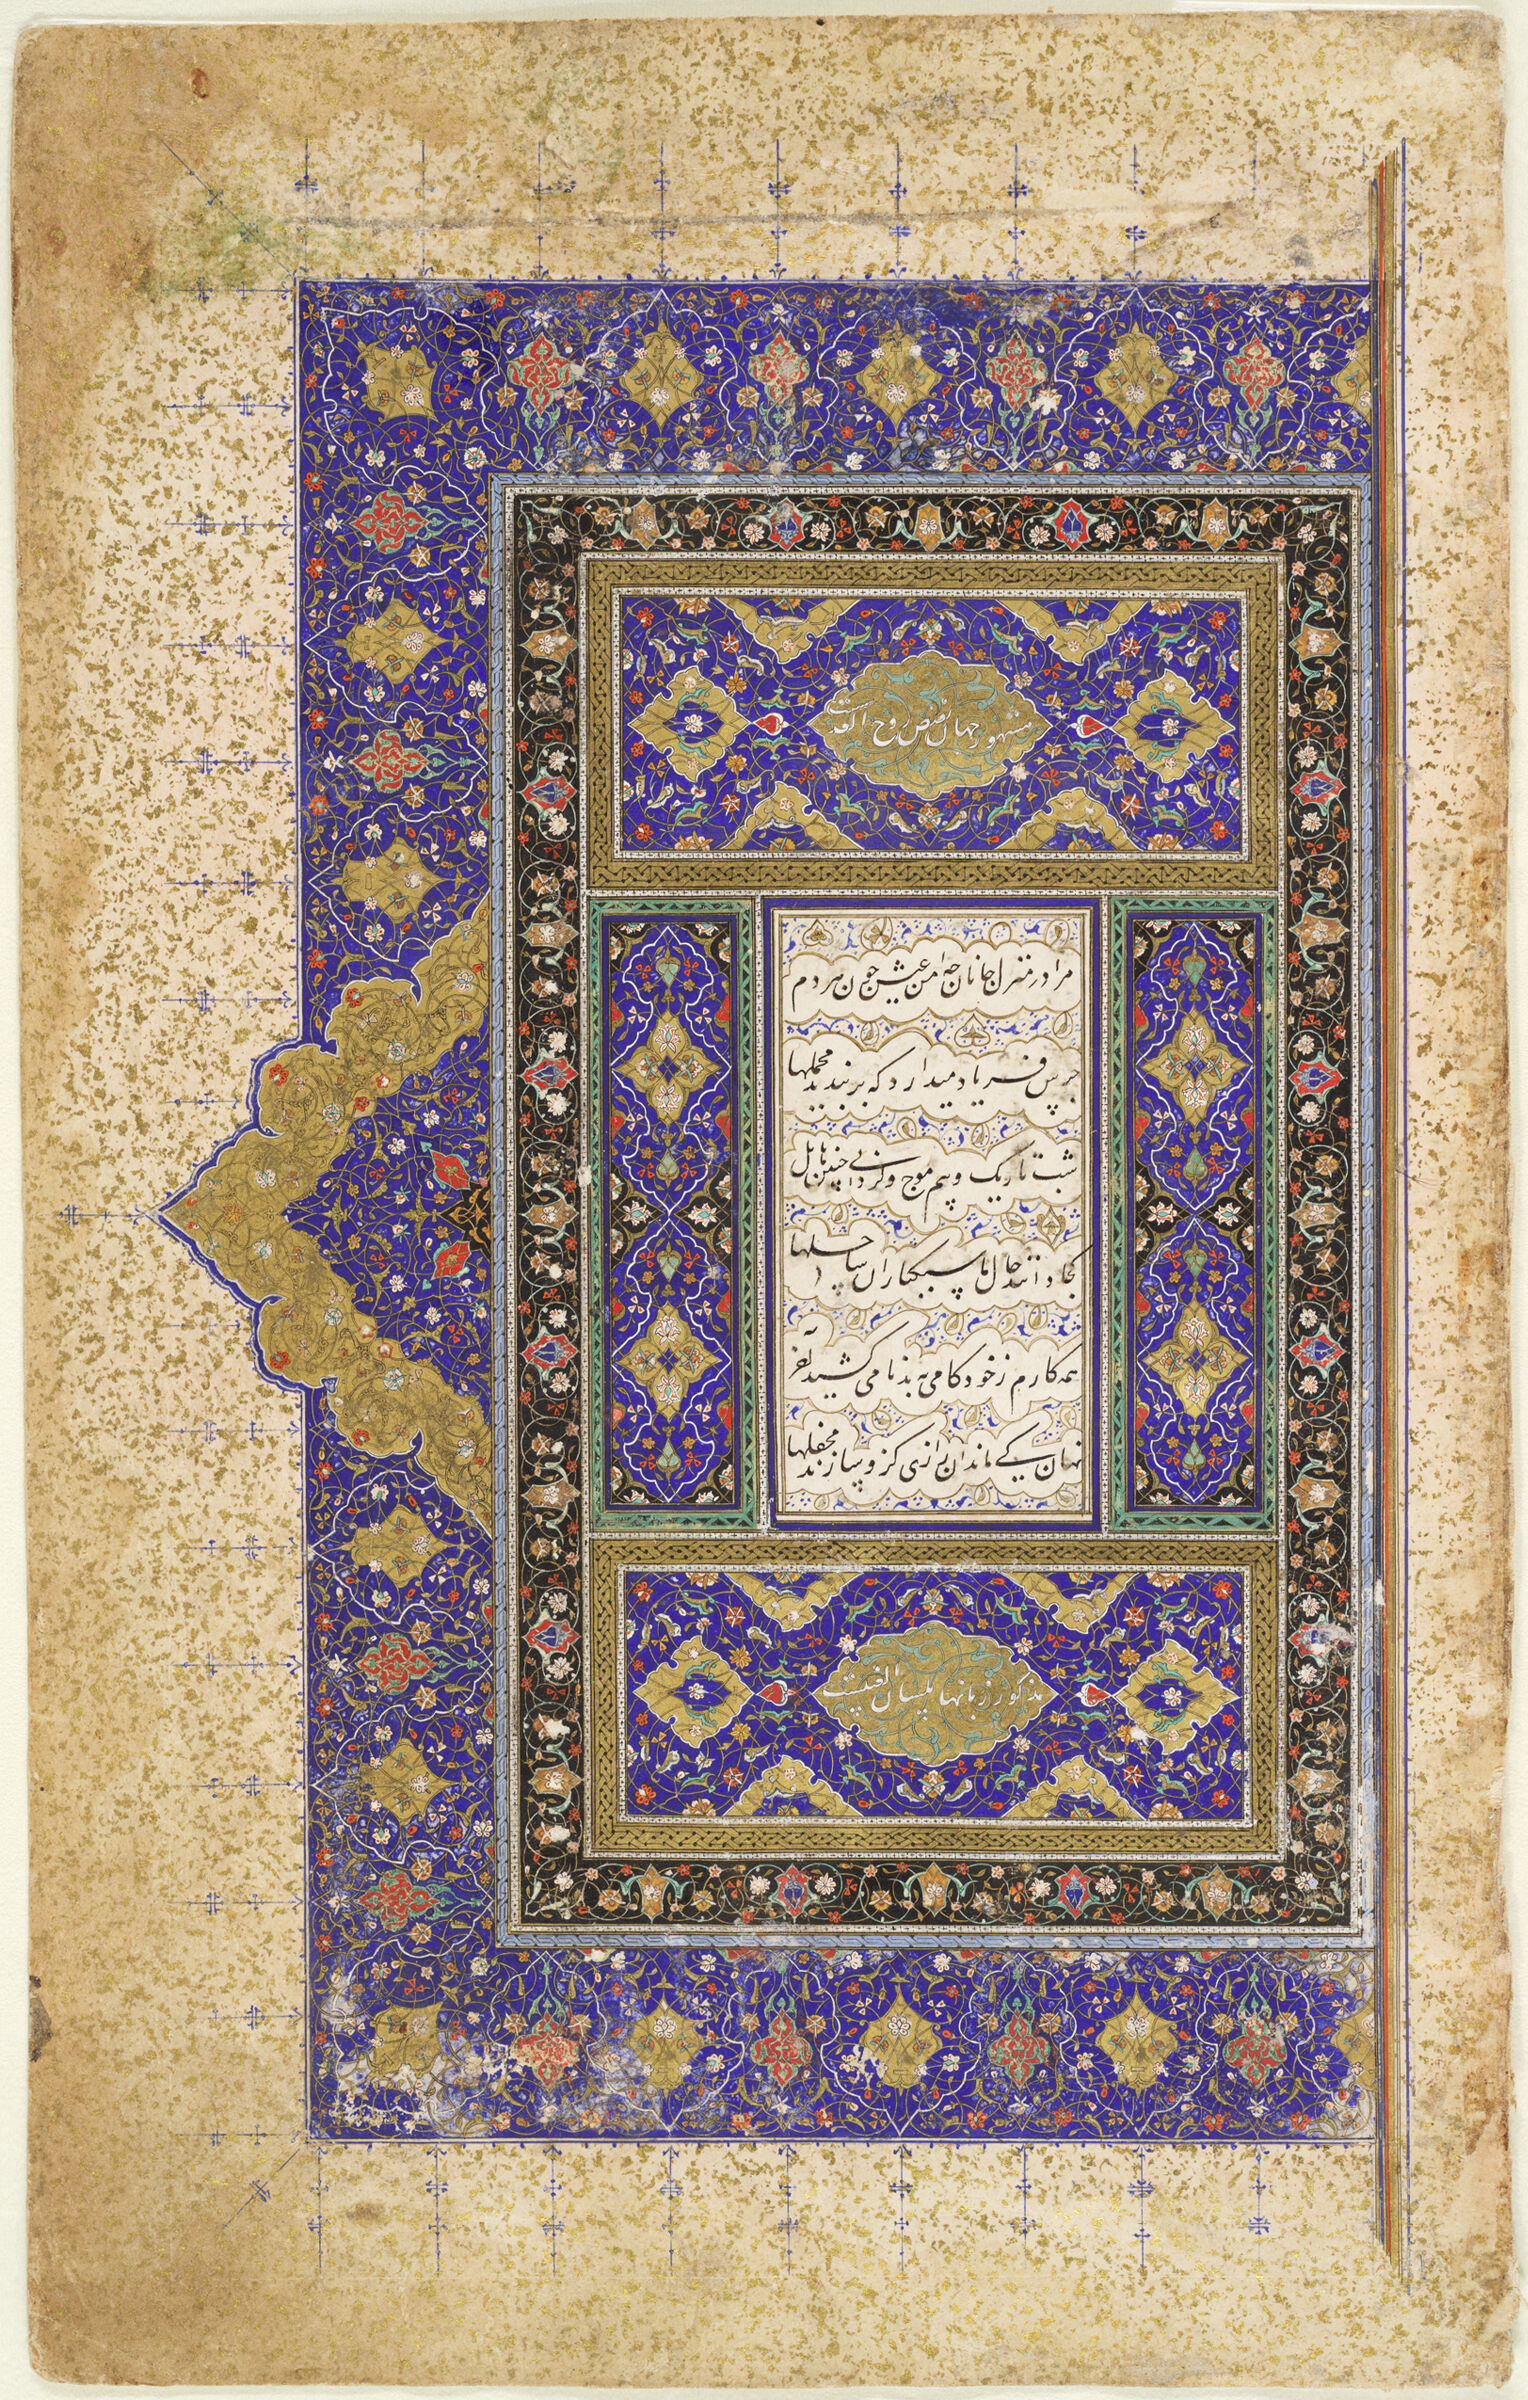 Verses From The Divan By Hafiz (Recto And Verso); Folio From A Manuscript, Left-Hand Side Of A Bifolio